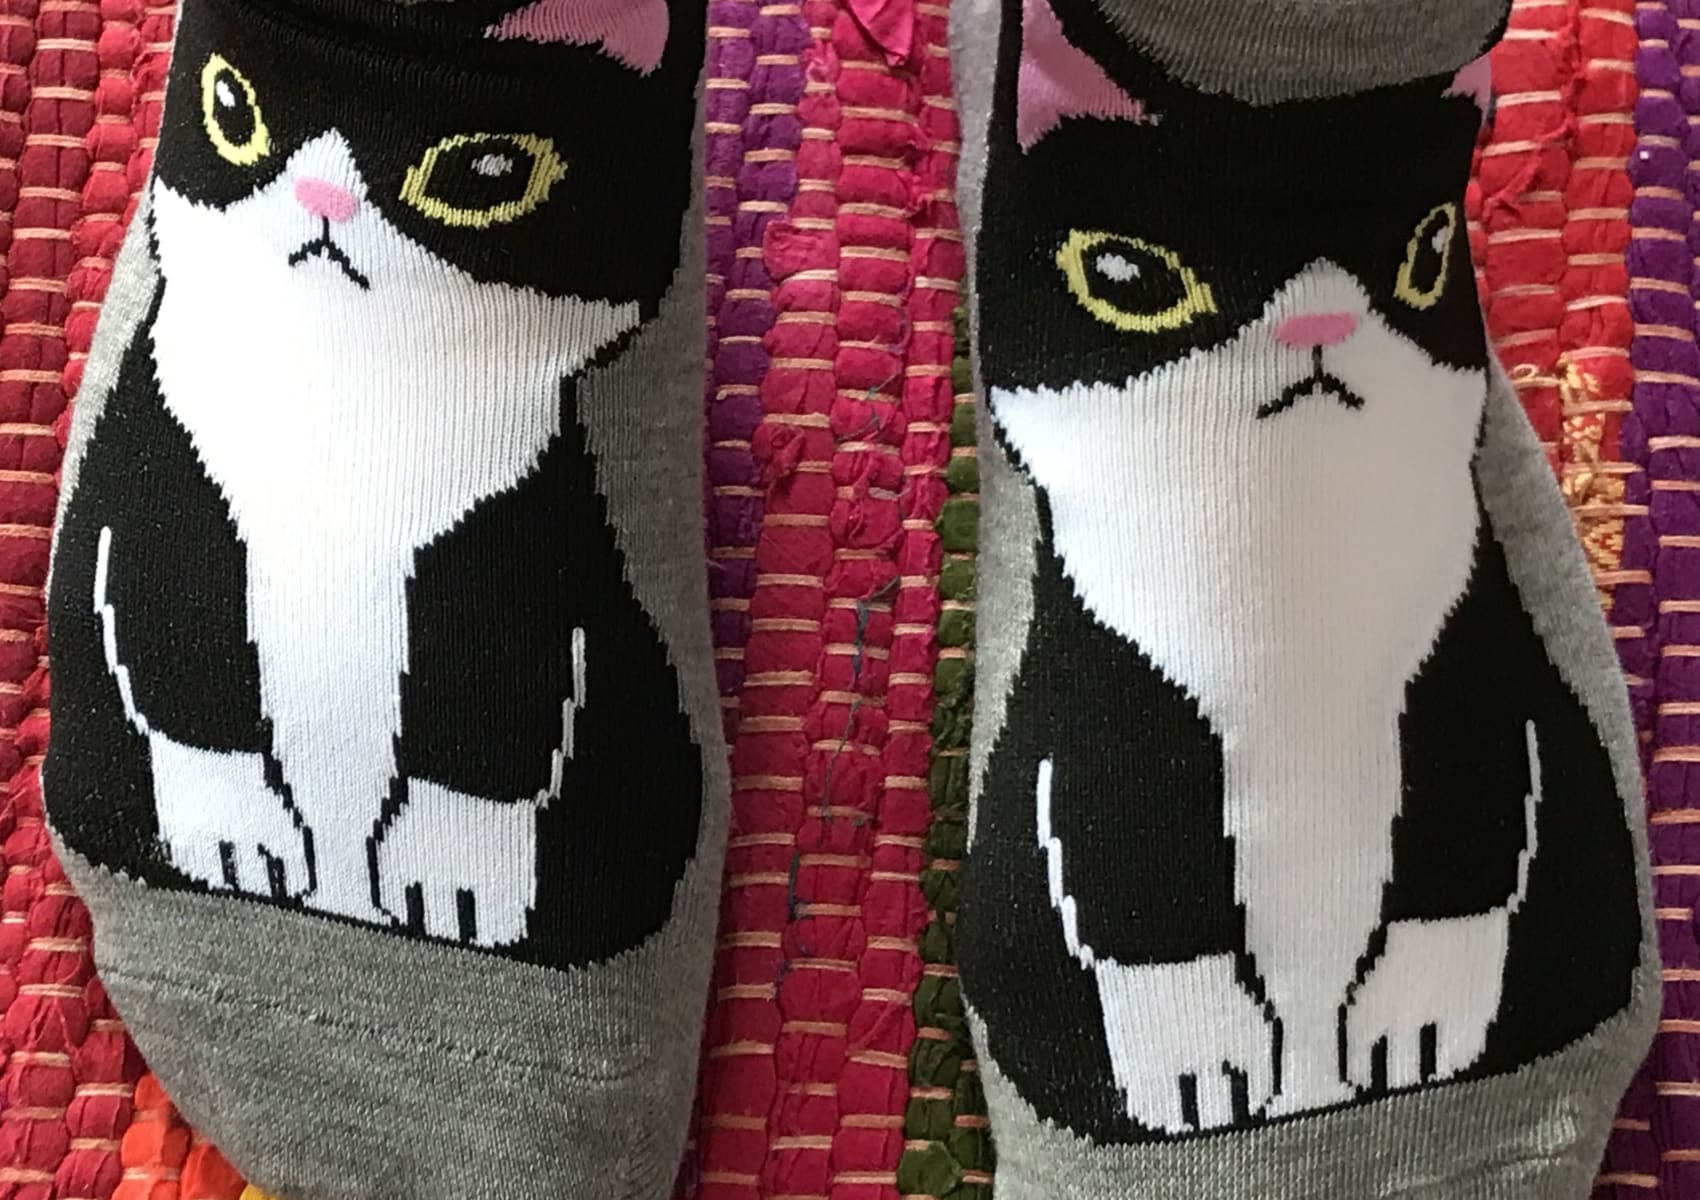 Ladies' pale grey ankle socks with black and white tuxedo cat